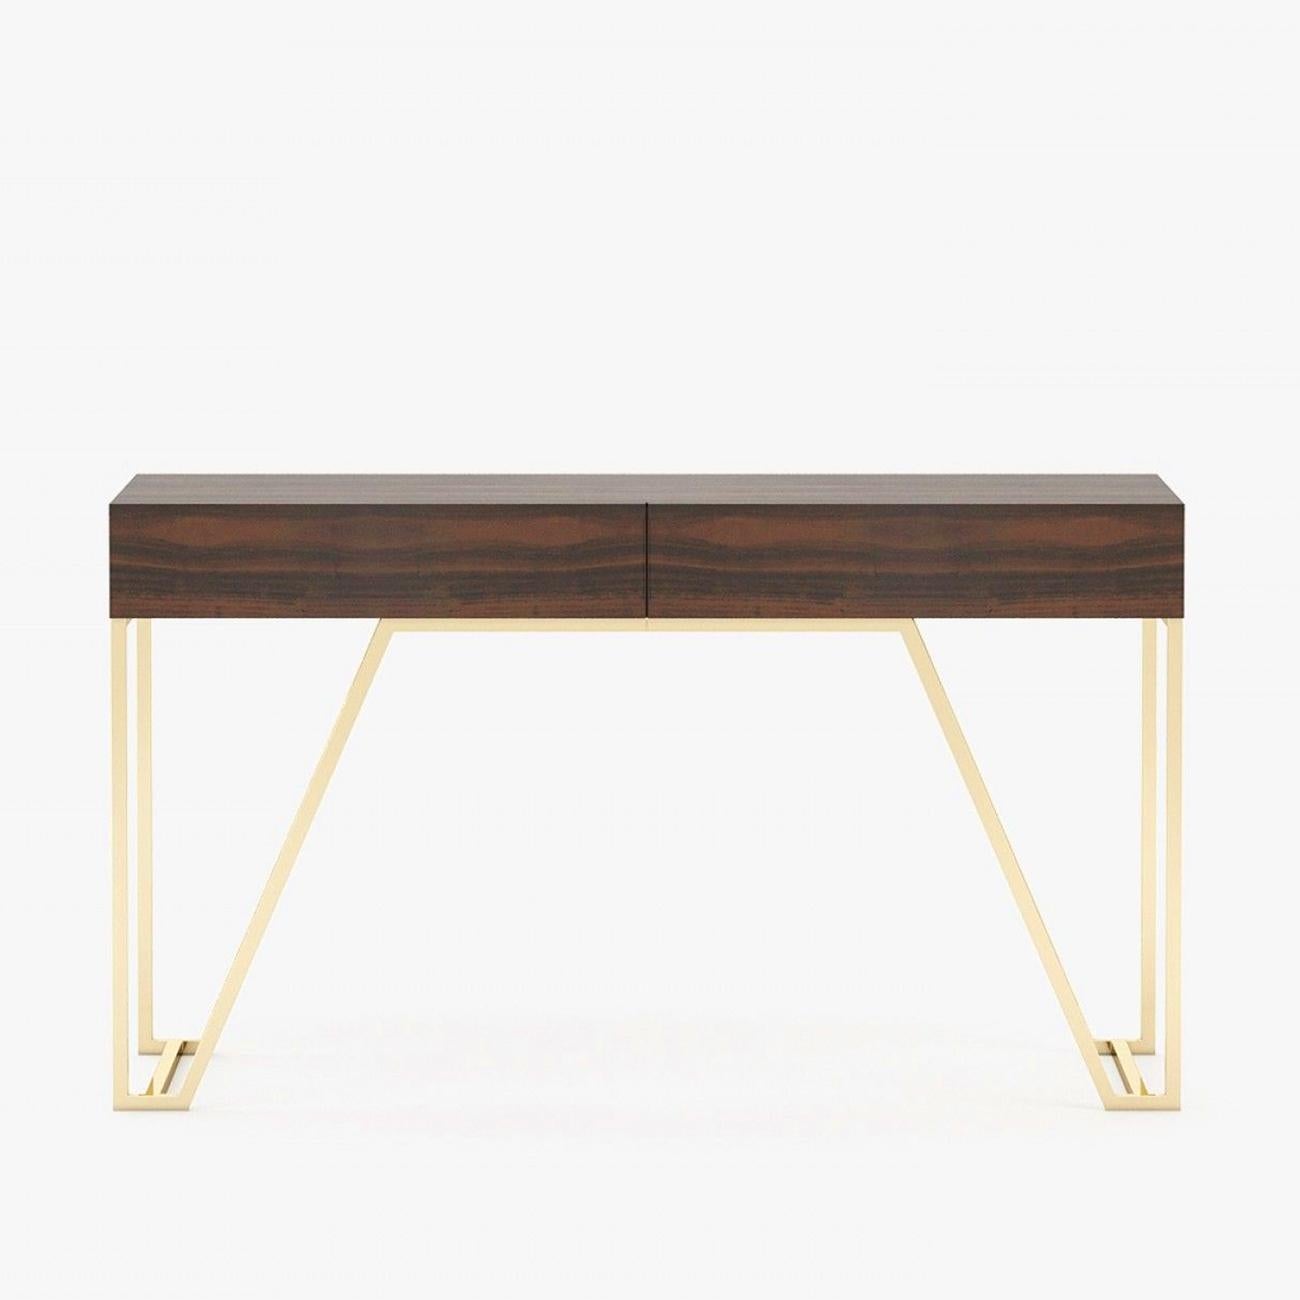 Console Table Seattle with structure in smocked eucalyptus veneered
wood in matte finish, with polished stainless steel base in gold finish.
Also available in ebony matte finish, or grey oak matte finish,
or natural oak finish, or rosewood matte